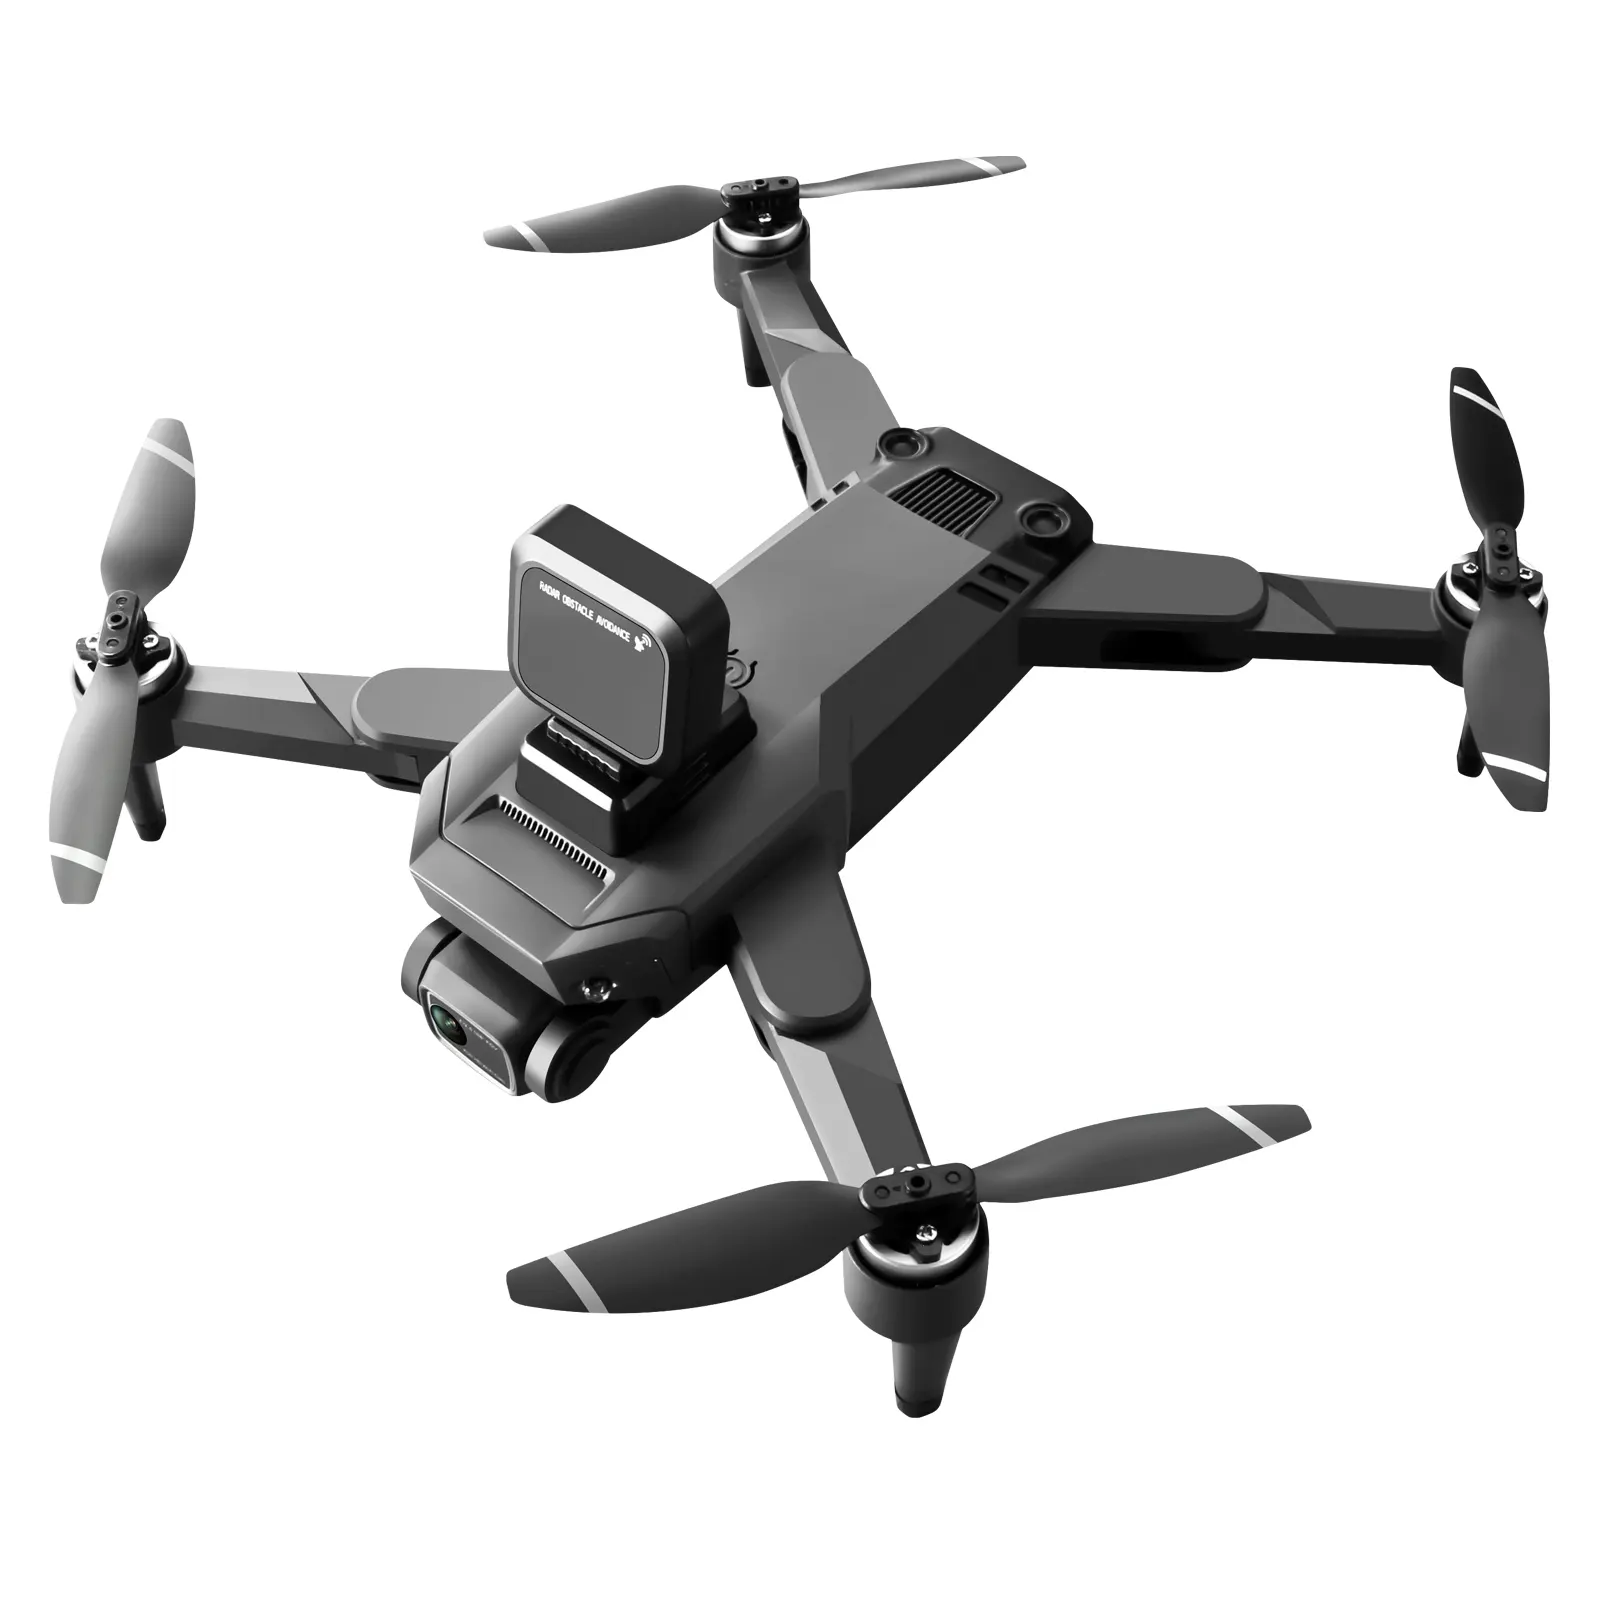 4K Dual Camera 25 Minutes Battery Life Flight Gravity Sensor 6 Axis 6CH RC Remote Control Altitude Holding FPV Drone